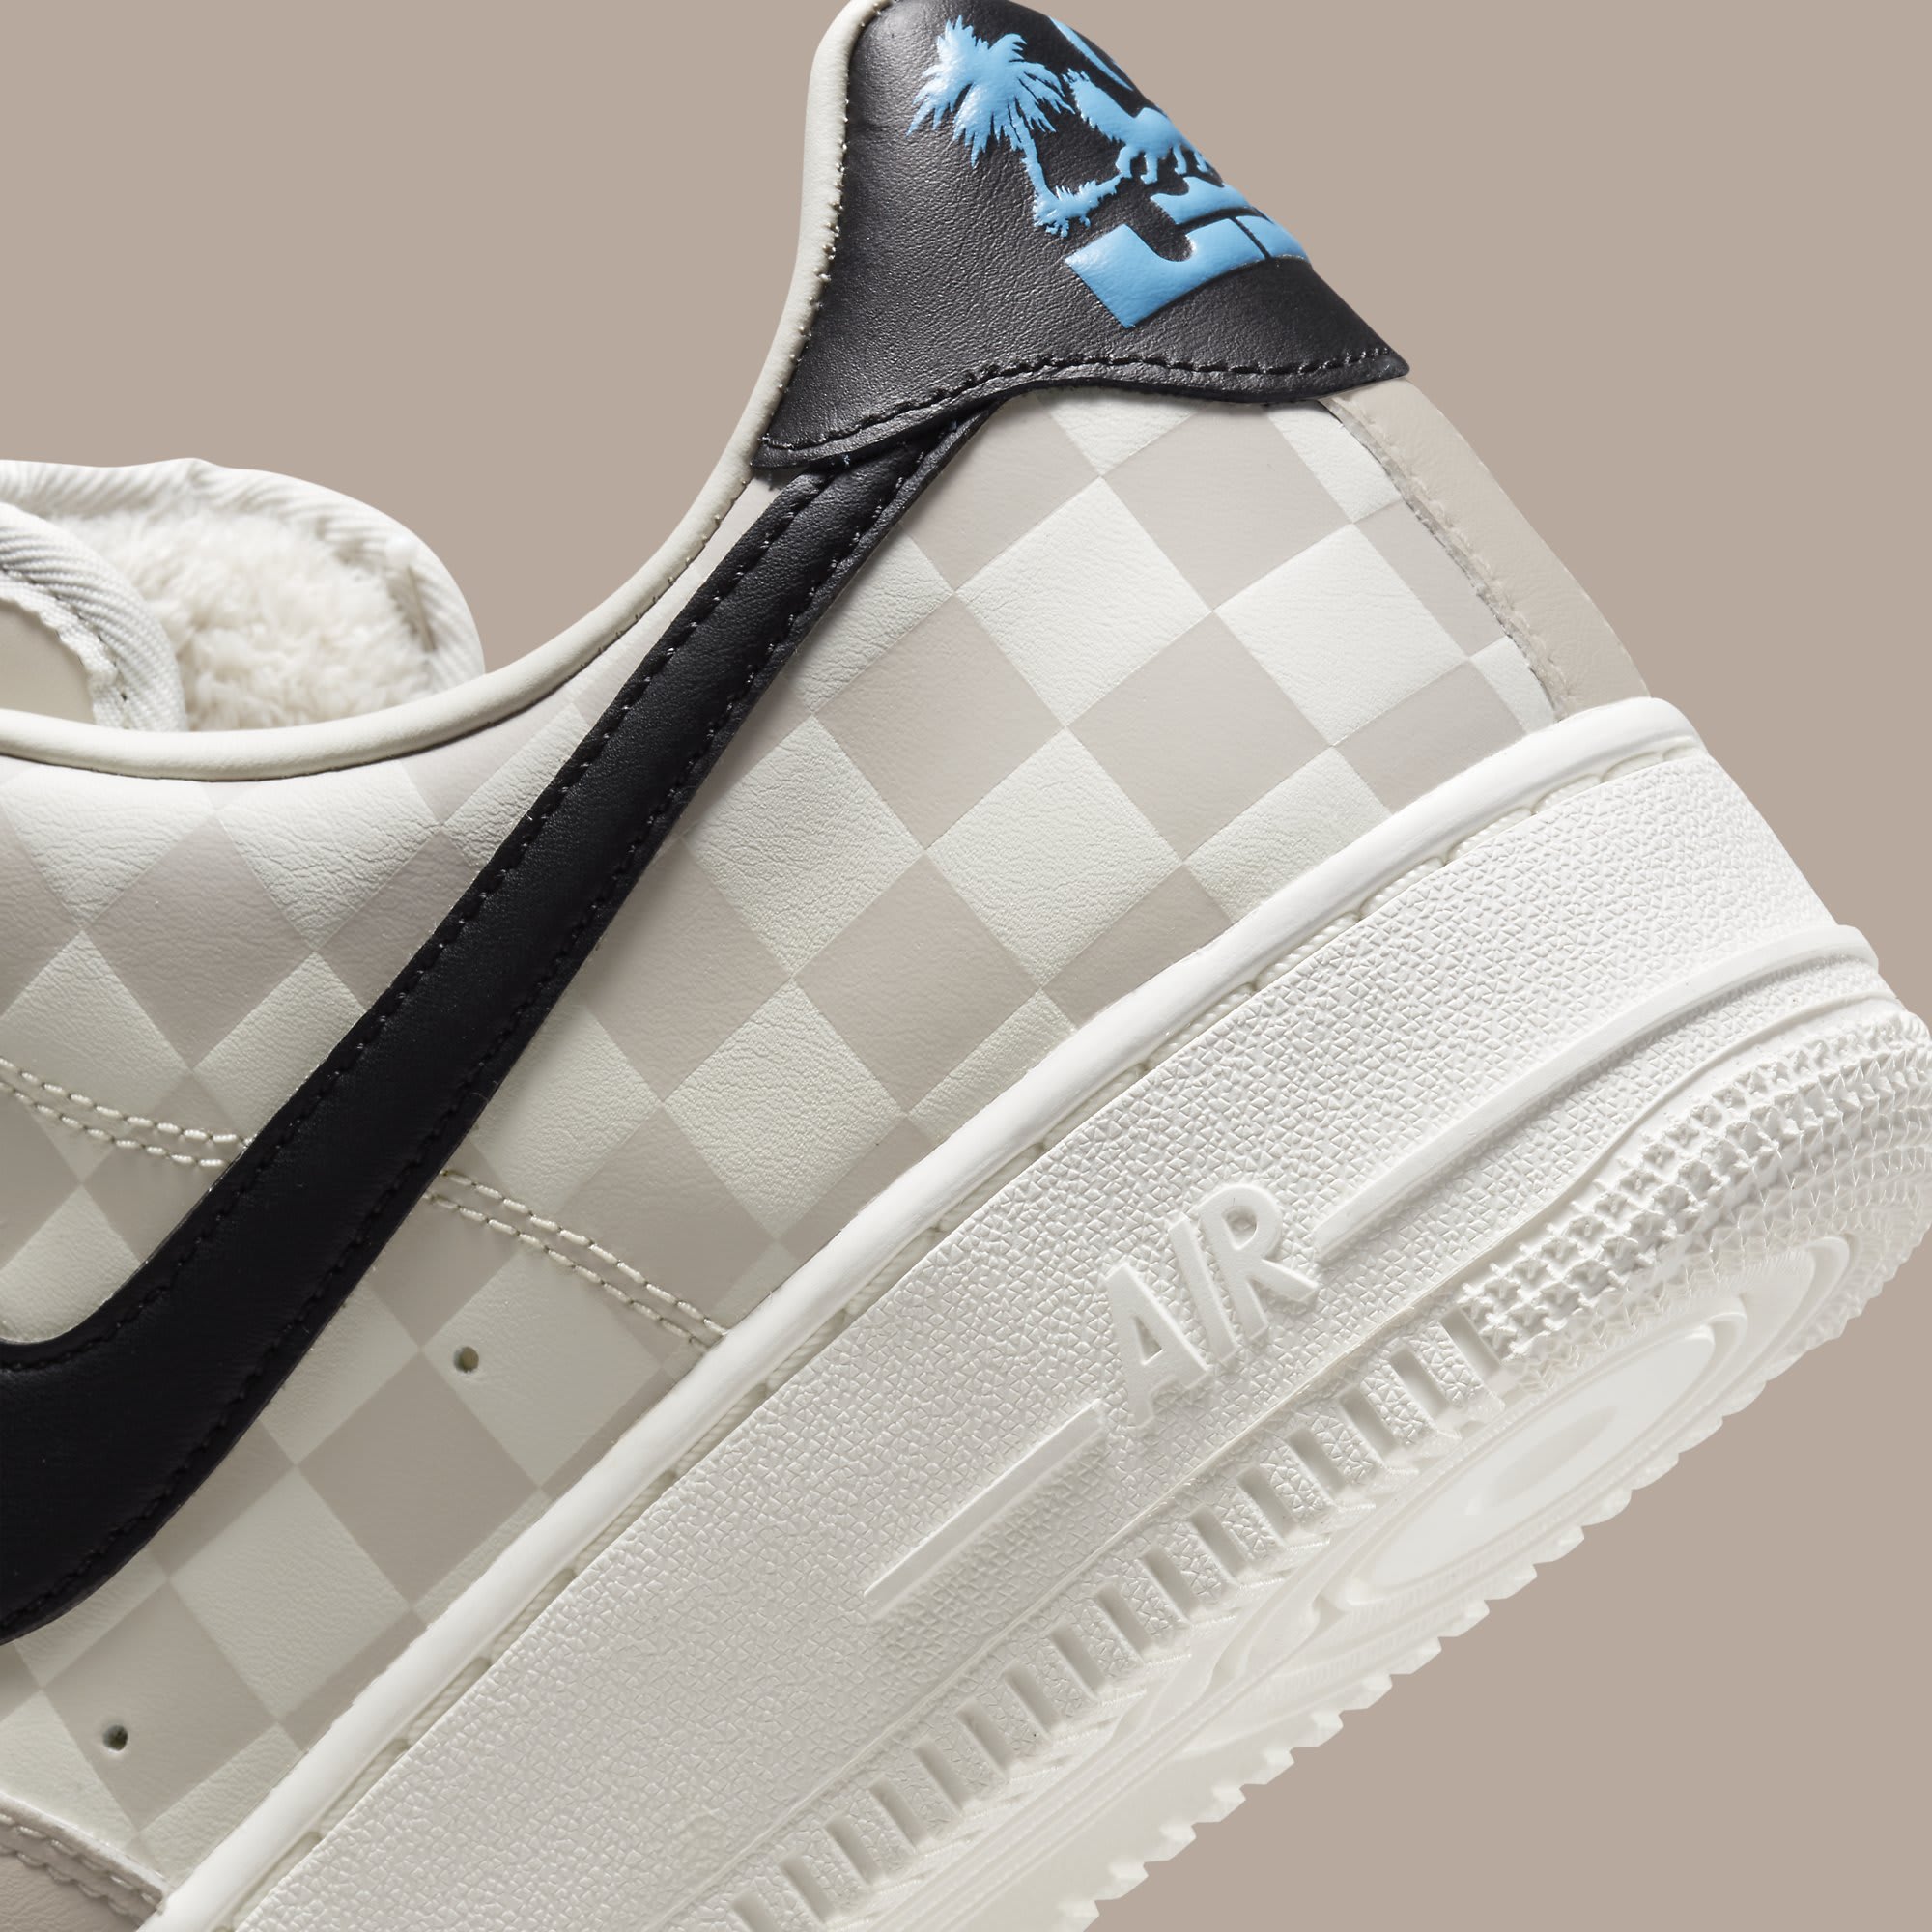 Nike x LeBron James Air Force 1 Low „Strive For Greatness“ Louis